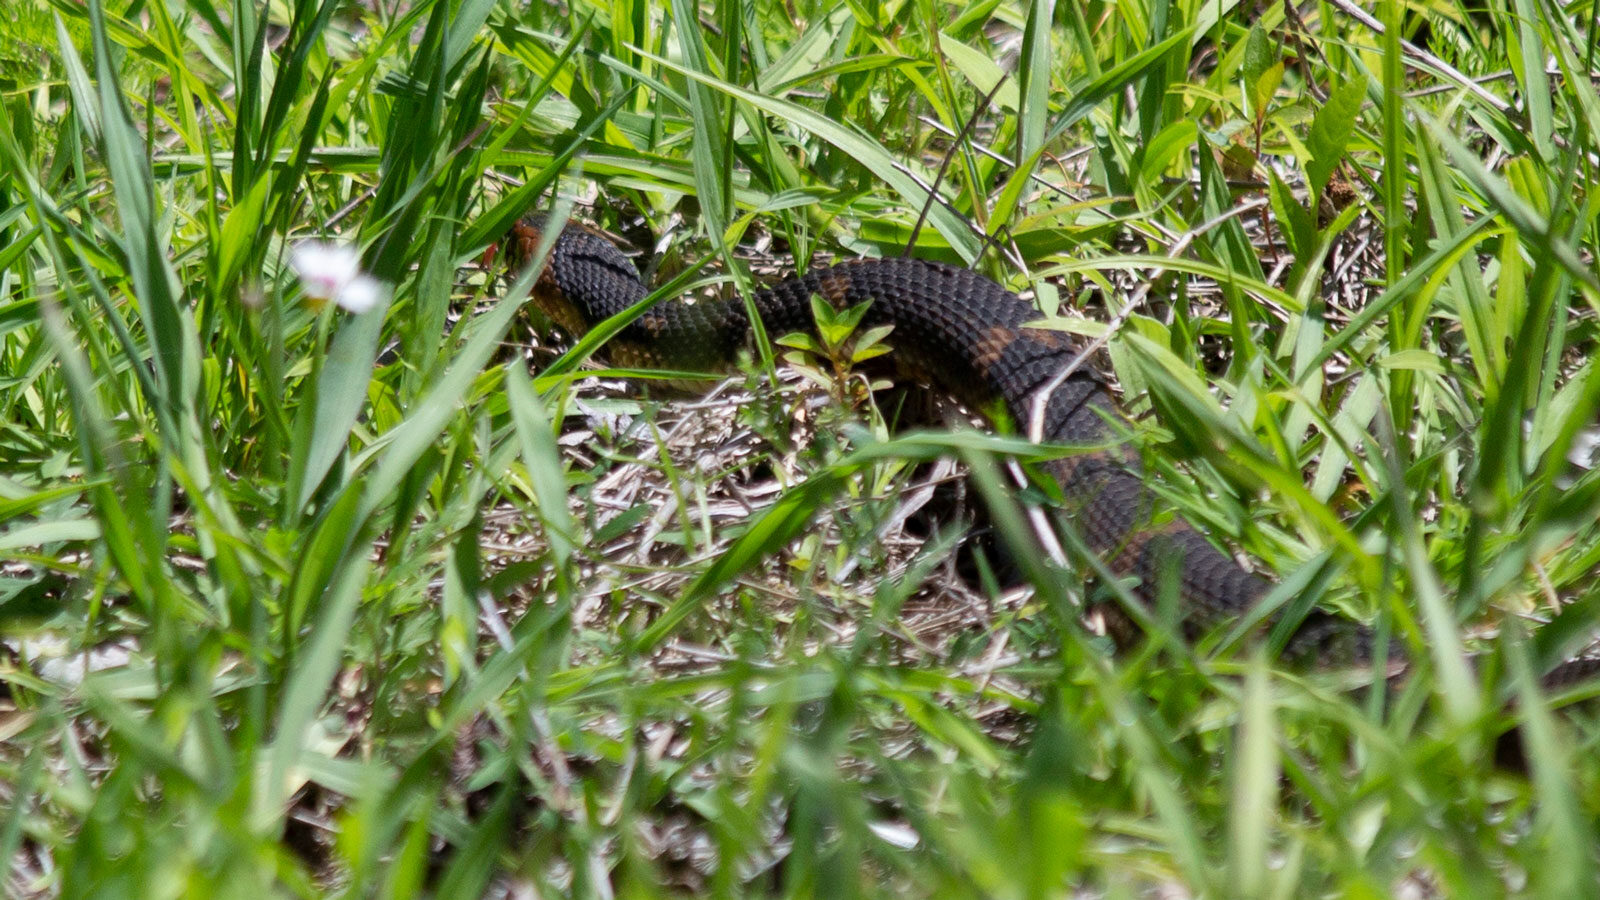 Broad-banded water snake slithering through grass